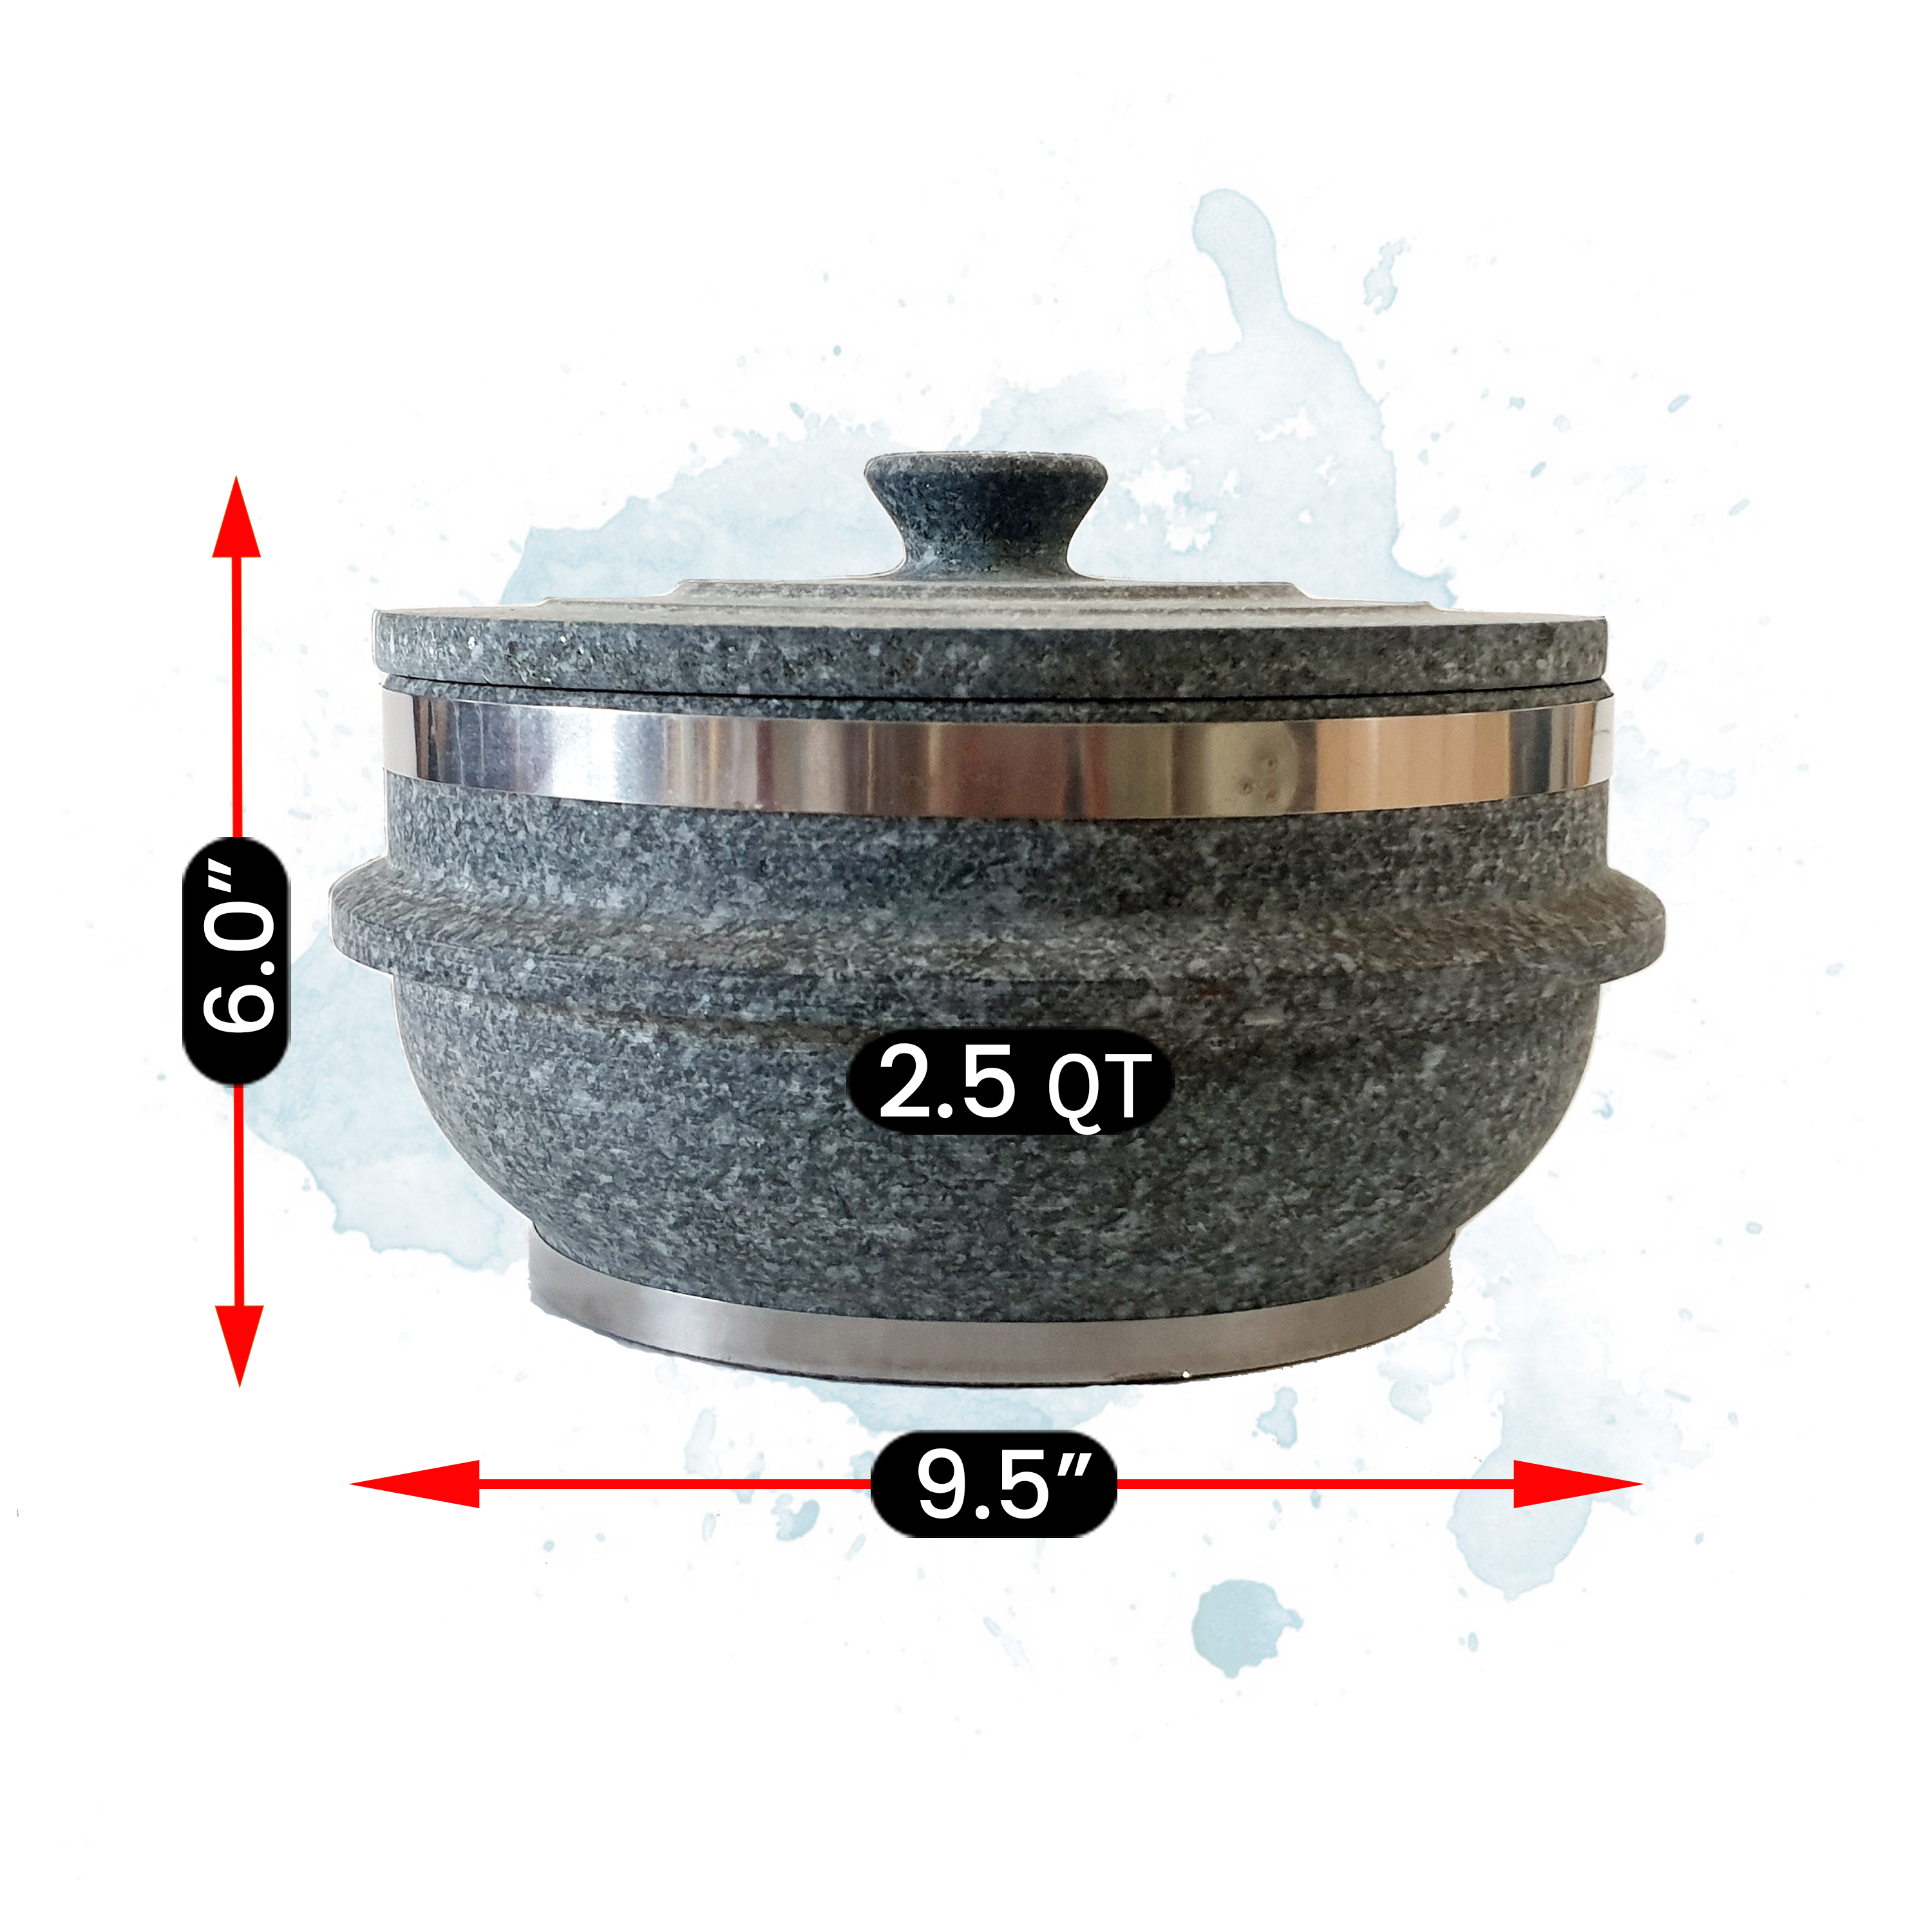 https://ancientcookware.com/images/stories/virtuemart/product/kor_1222_09_5_Large_with_measurements.jpg